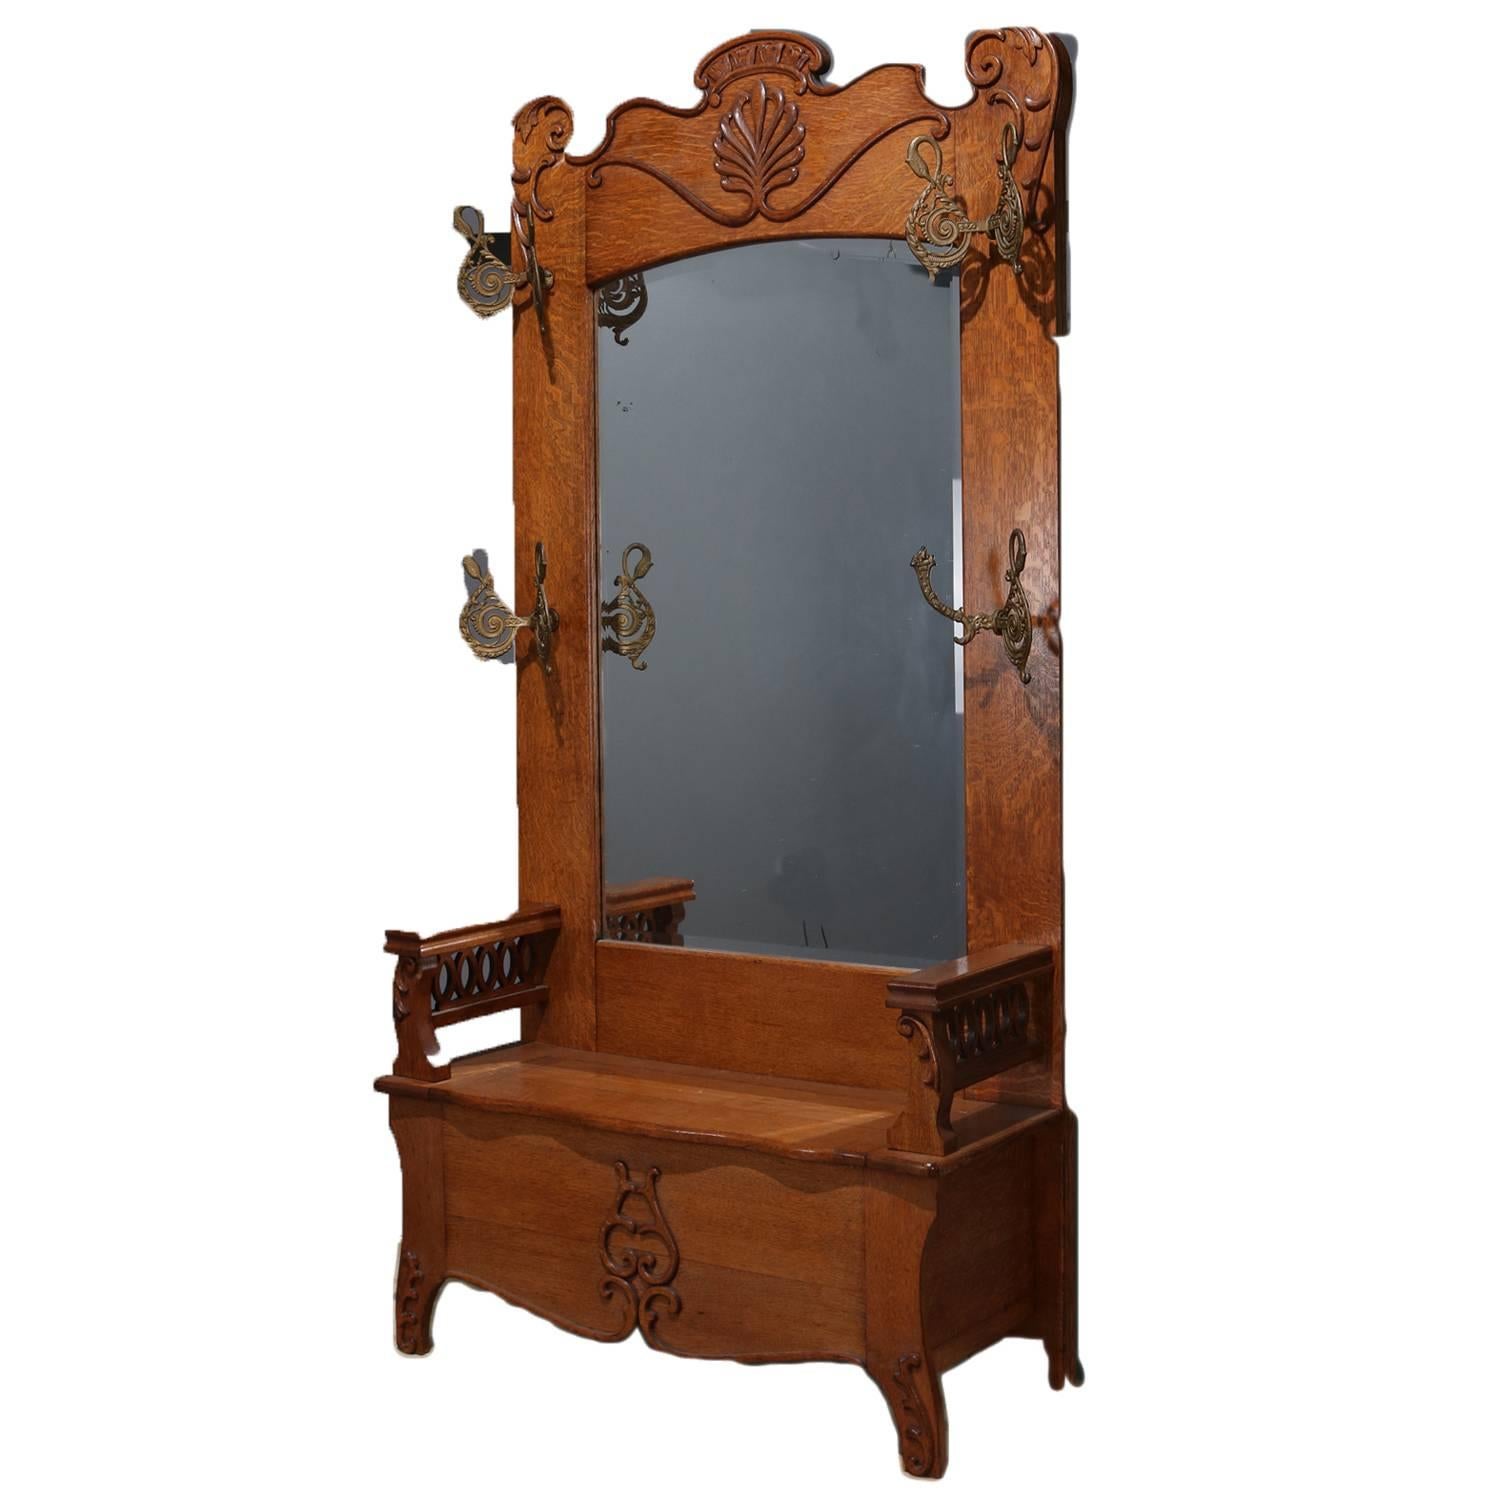 Oversized Horner School hall tree features oak construction with crest having carved central shell and flanking scroll and foliate decoration, pierced arms flanking the scalloped lift top seat, circa 1910

Measures: 90.5